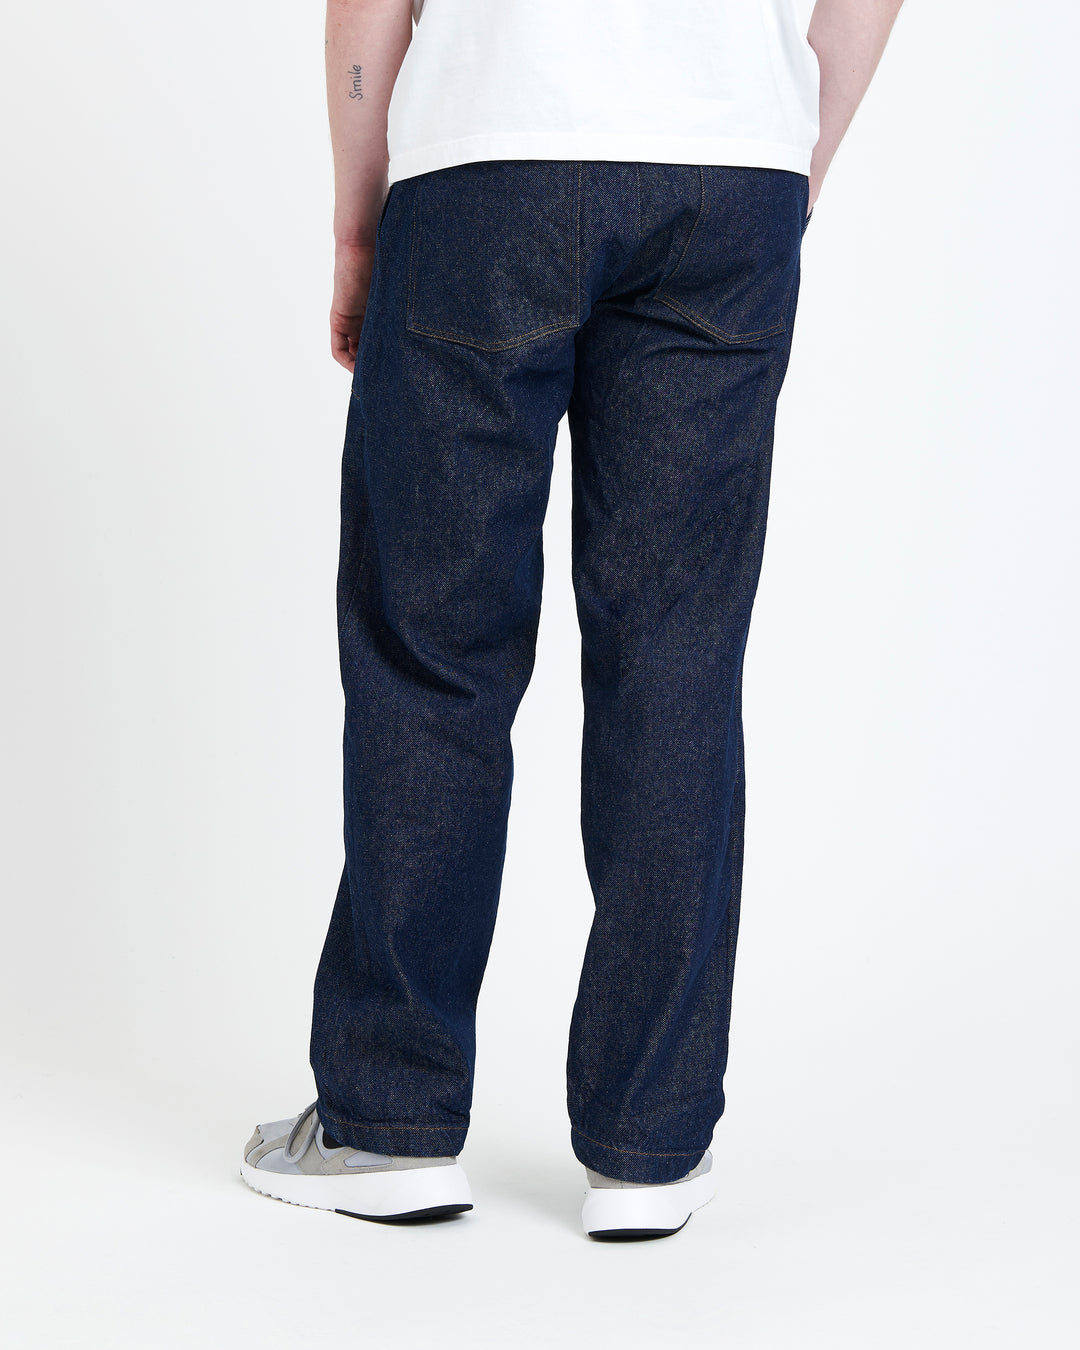 New Optimist menswear Ric | Rinse-washed loose jeans Pants